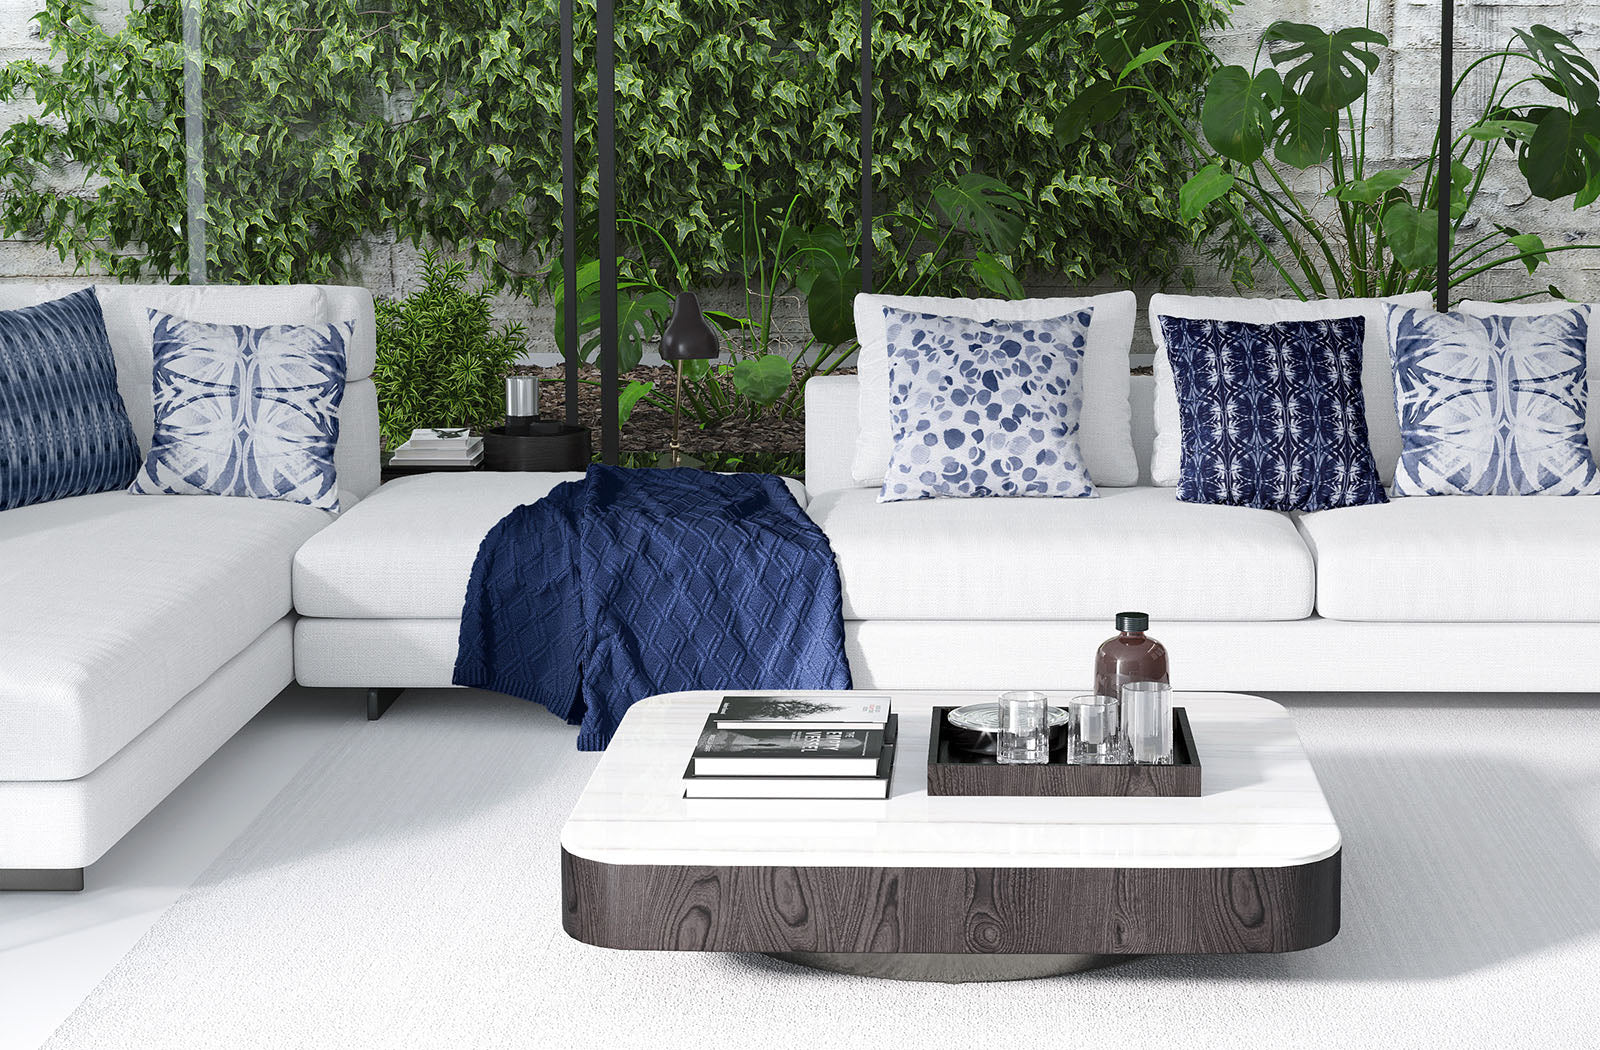 Modern living room scene featuring a collection of blue and white pillows on white couch